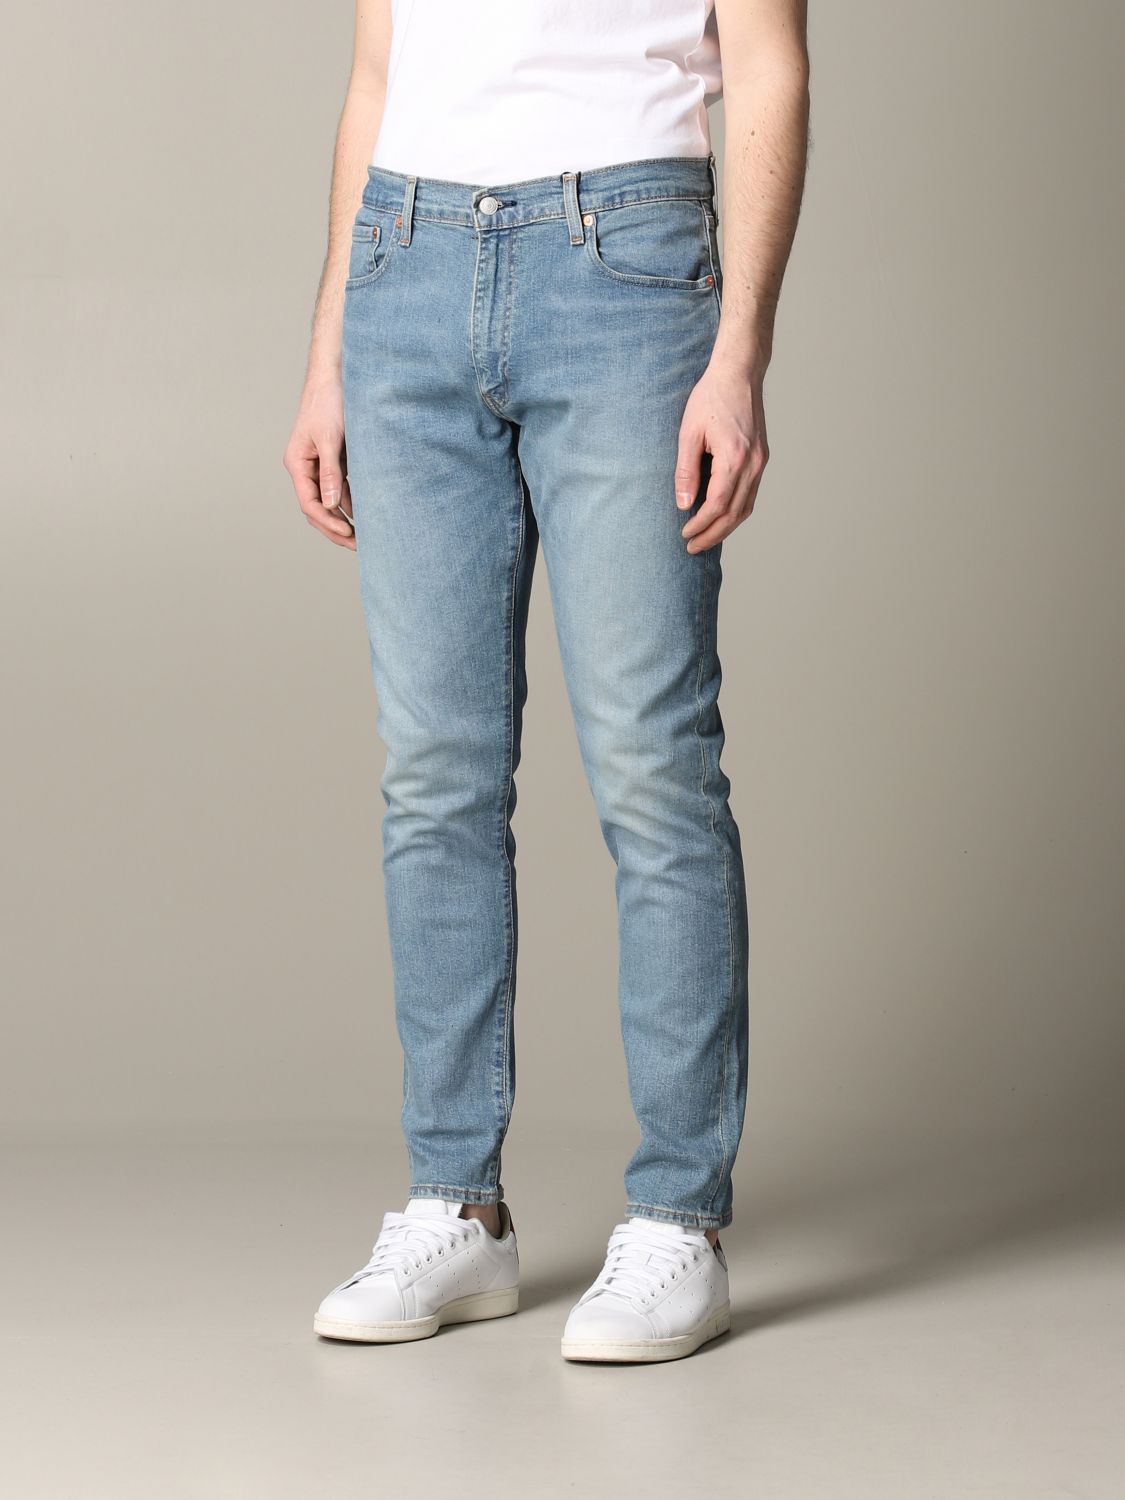 levis used jeans